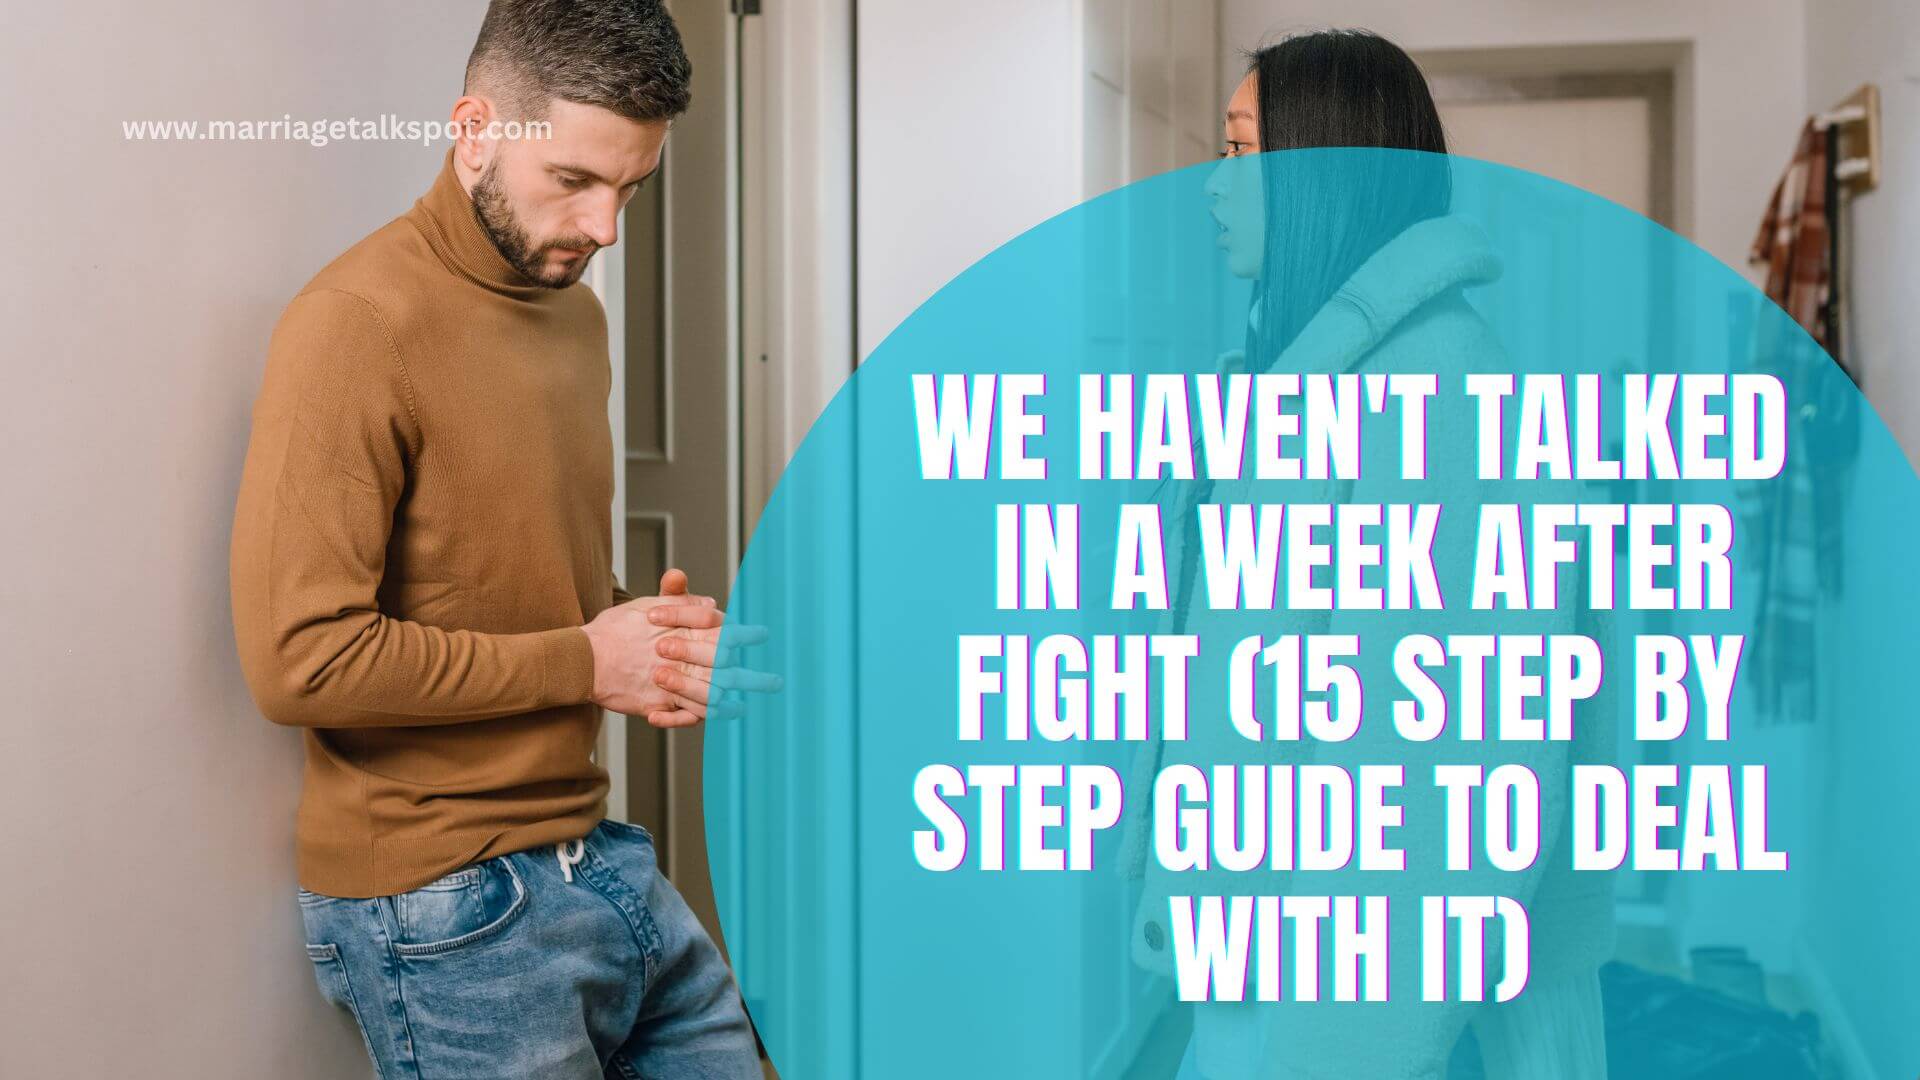 We Haven't Talked In A Week After Fight (15 Step By Step Guide To Deal With It)